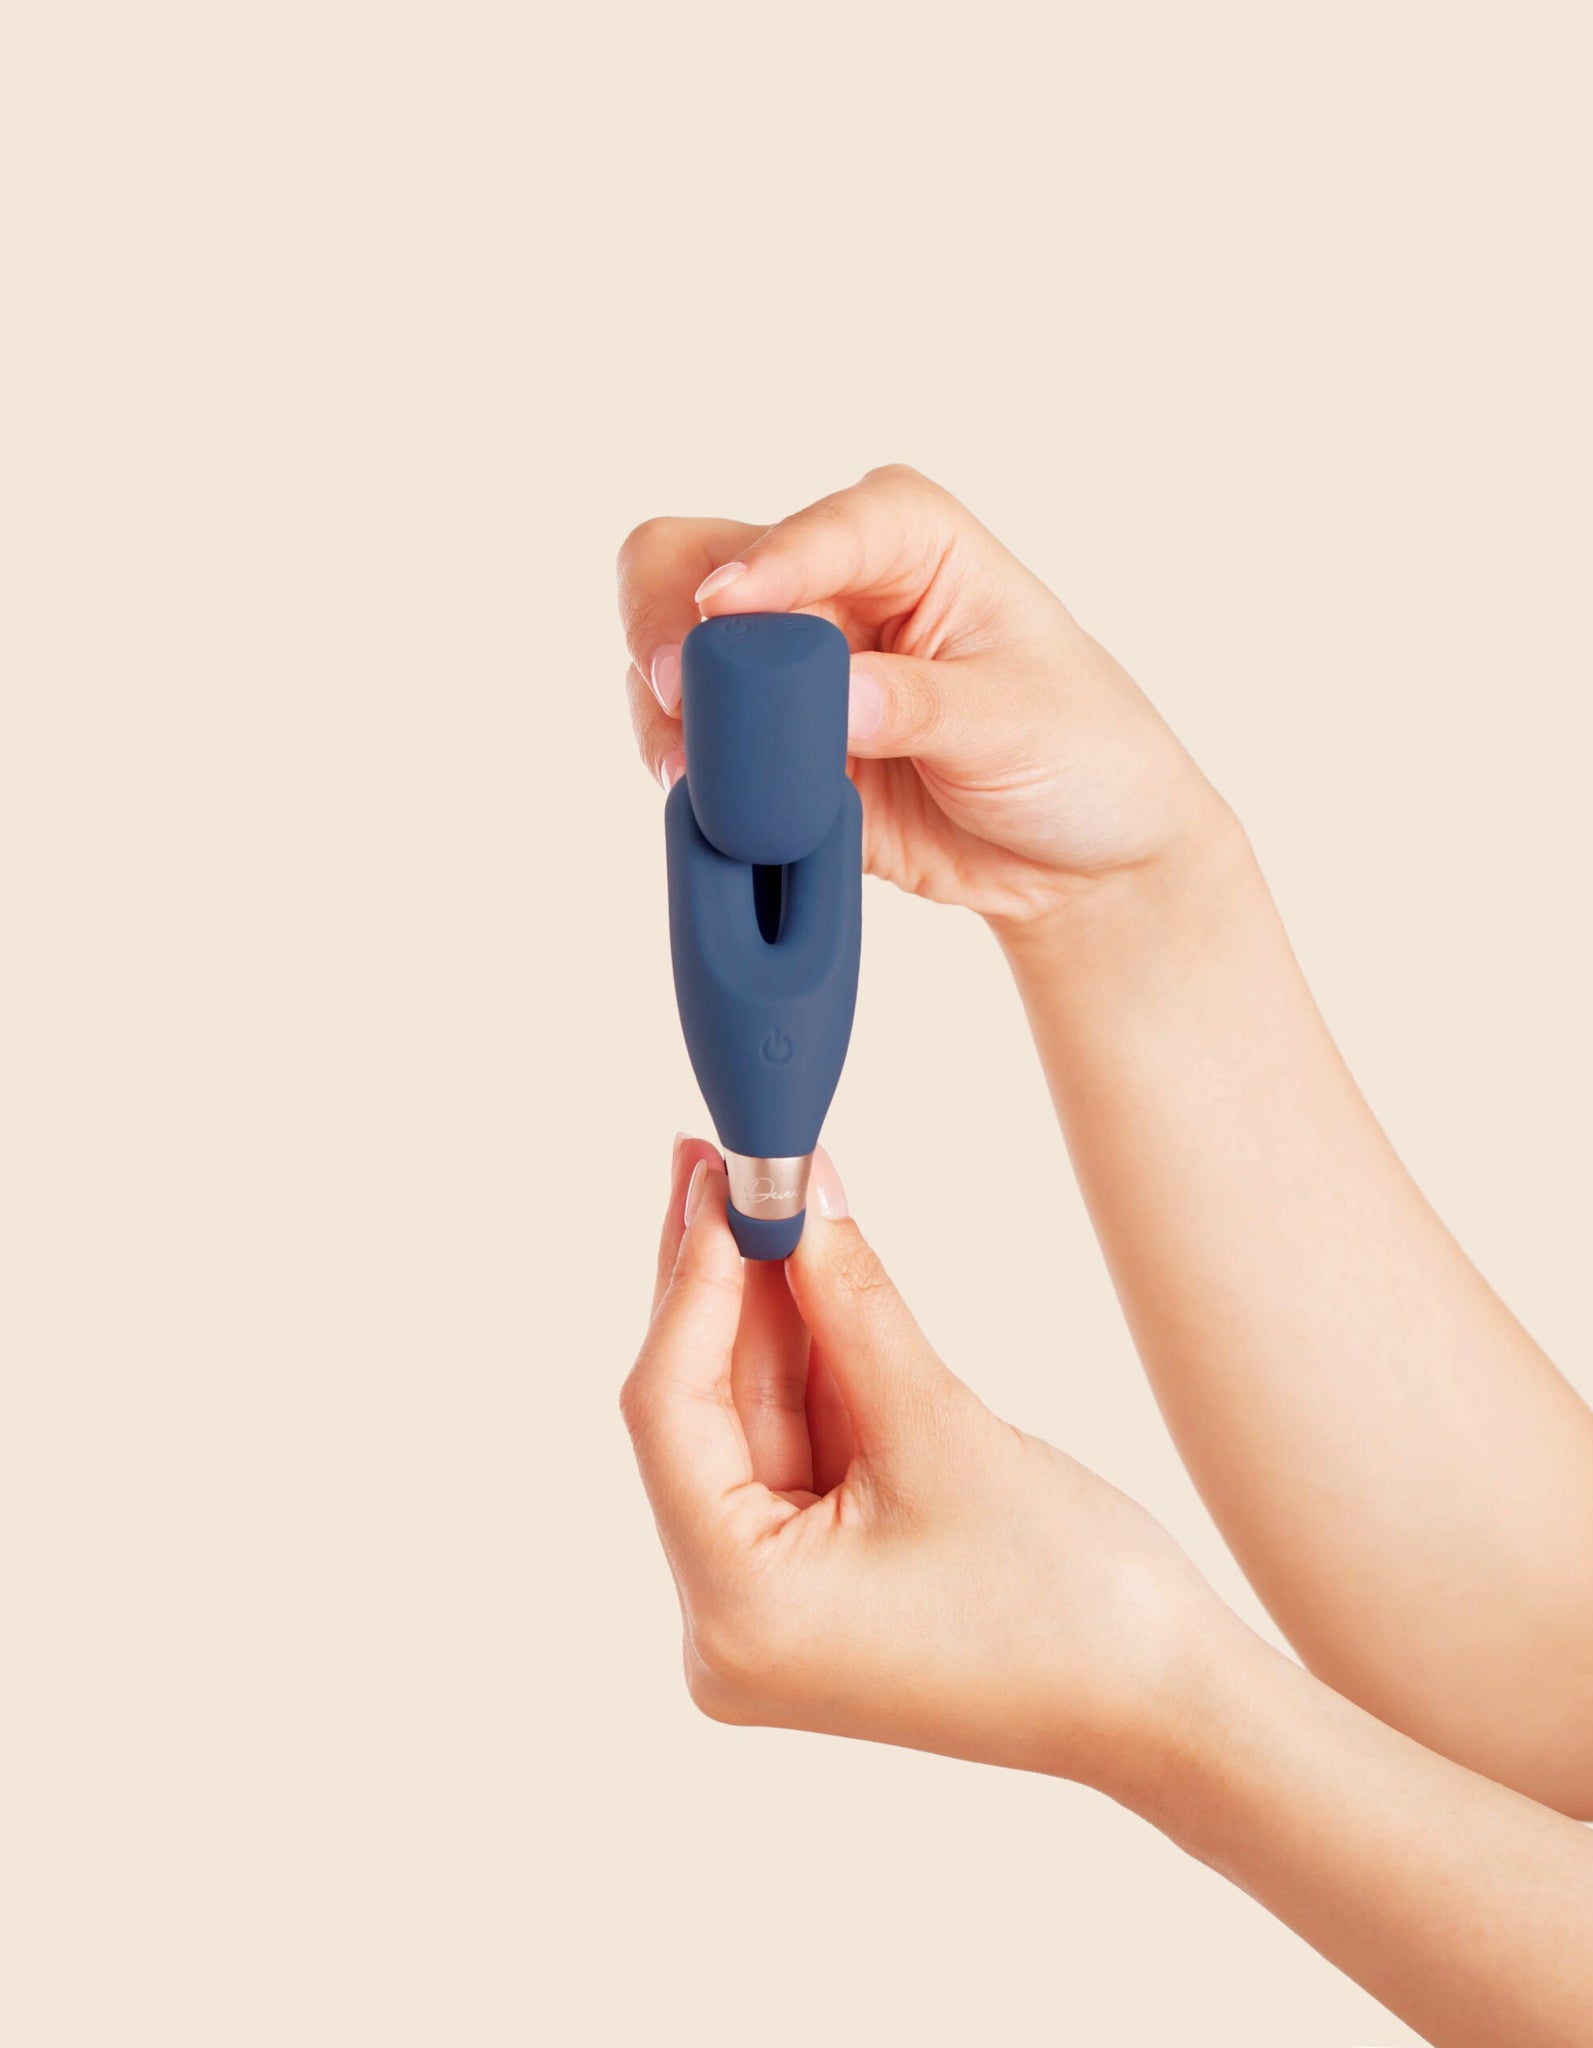 Deia - the Wearable vibrator with remote shown being taken apart